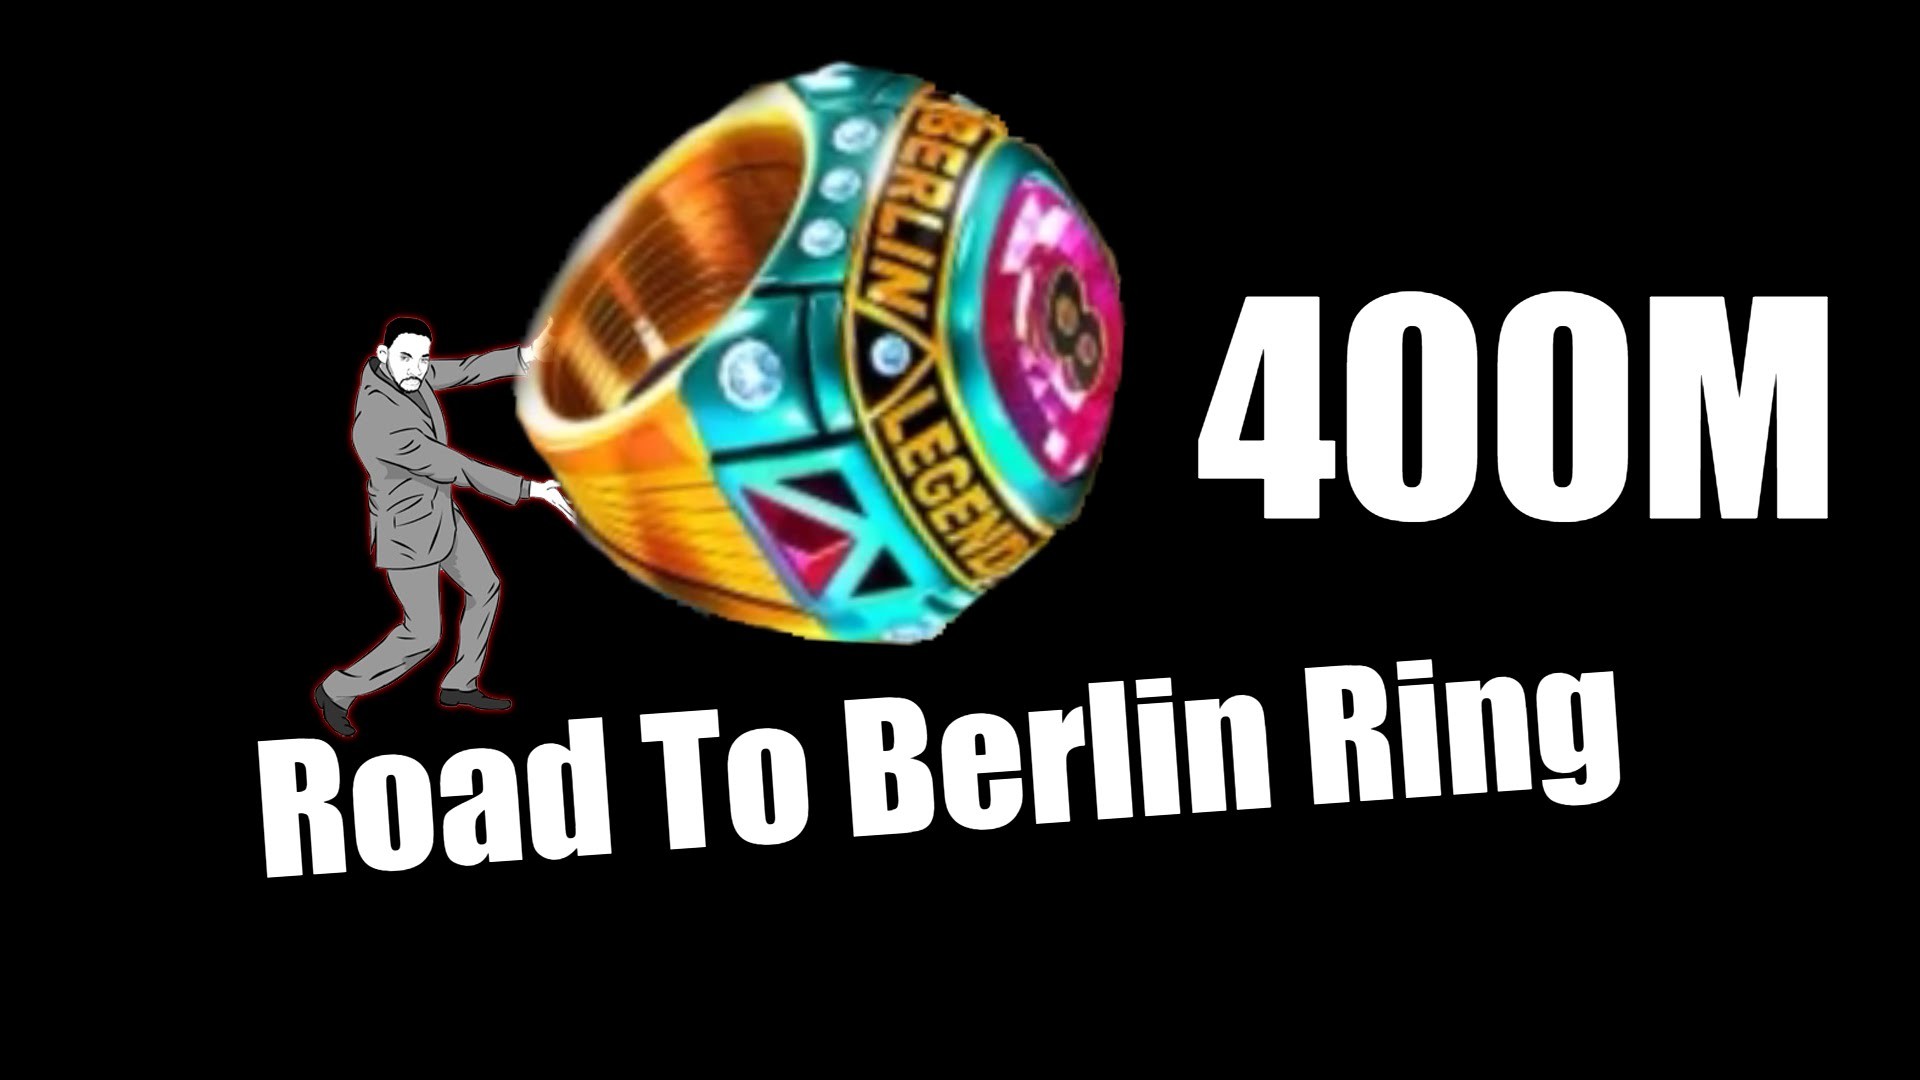 8 Ball Pool 400M Road To Berlin RIng Part